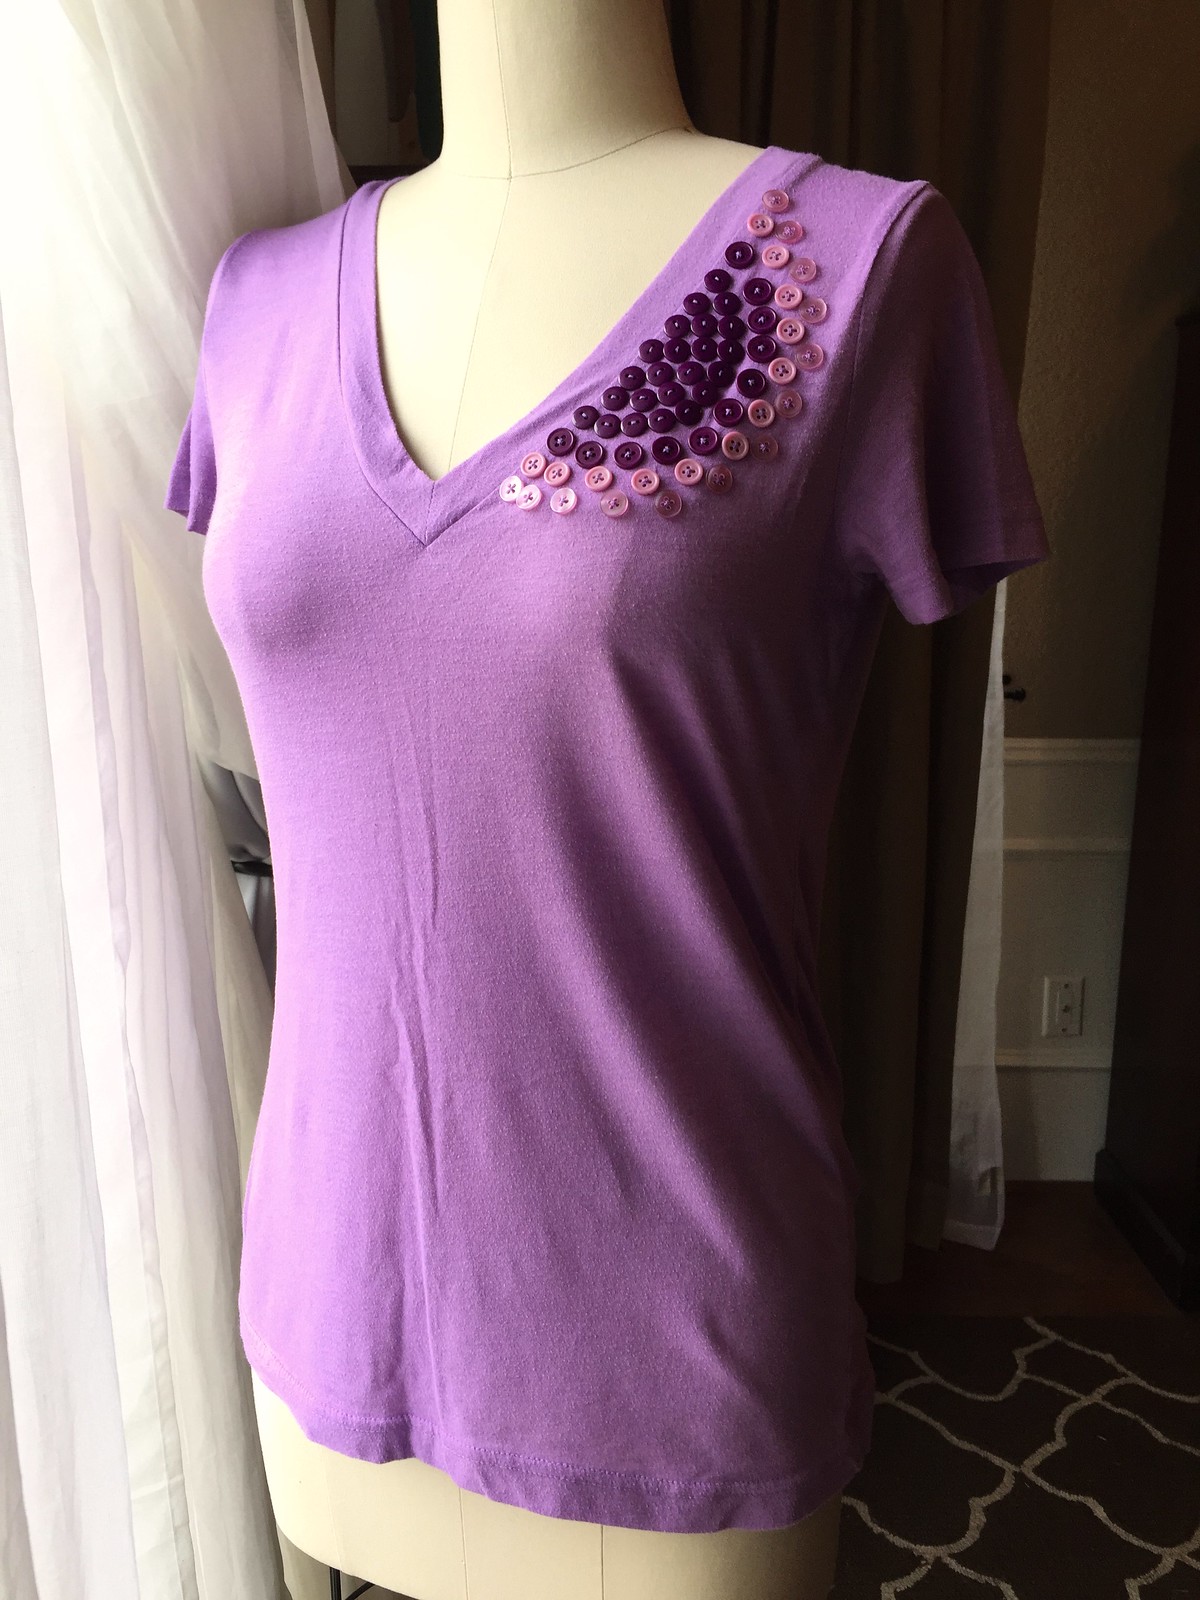 Button-Embellished Tee - After